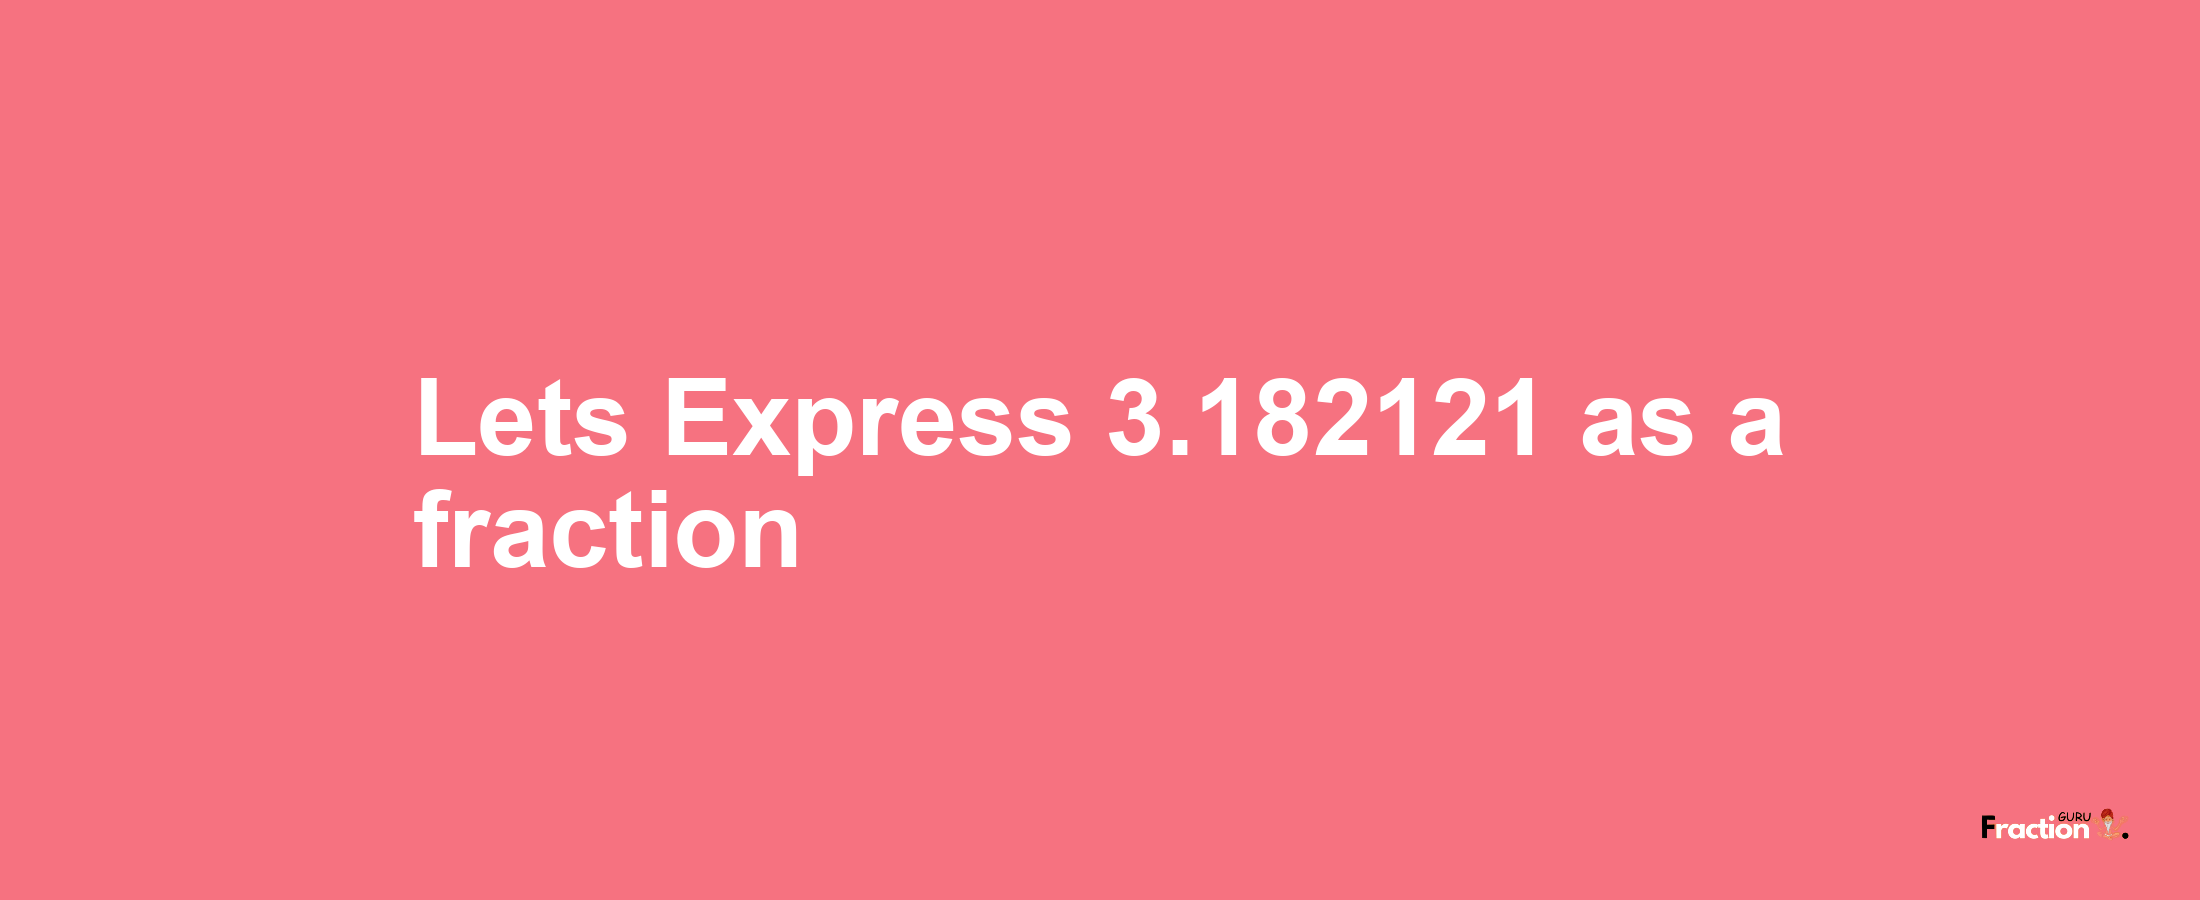 Lets Express 3.182121 as afraction